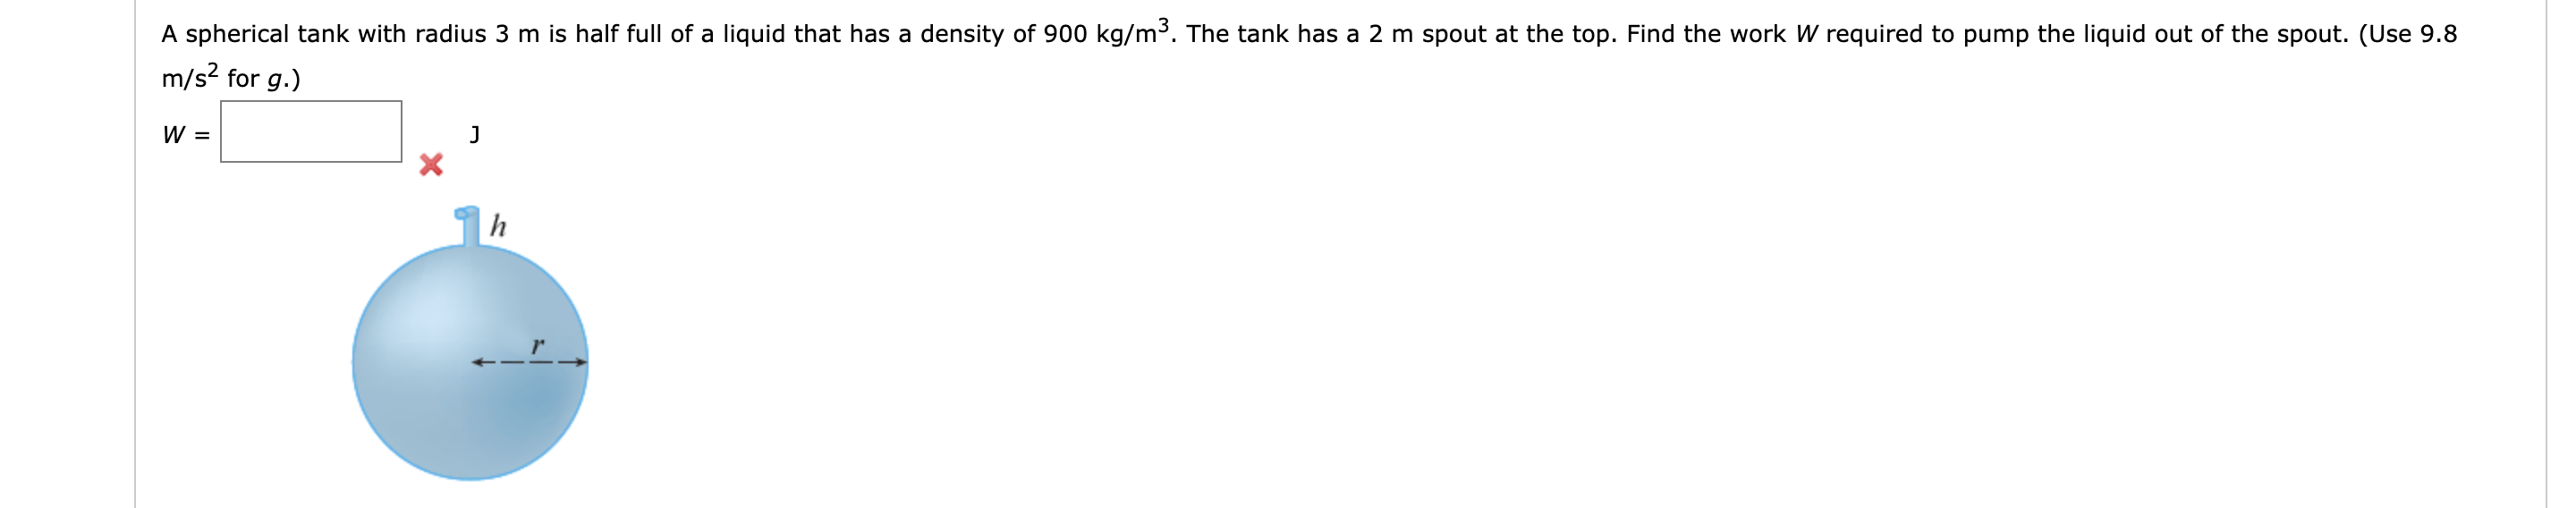 A spherical tank with radius 3 m is half full of a liquid that has a density of 900 kg/m³. The tank has a 2 m spout at the top. Find the work W required to pump the liquid out of the spout. (Use 9.8
m/s? for g.)
W =
h
